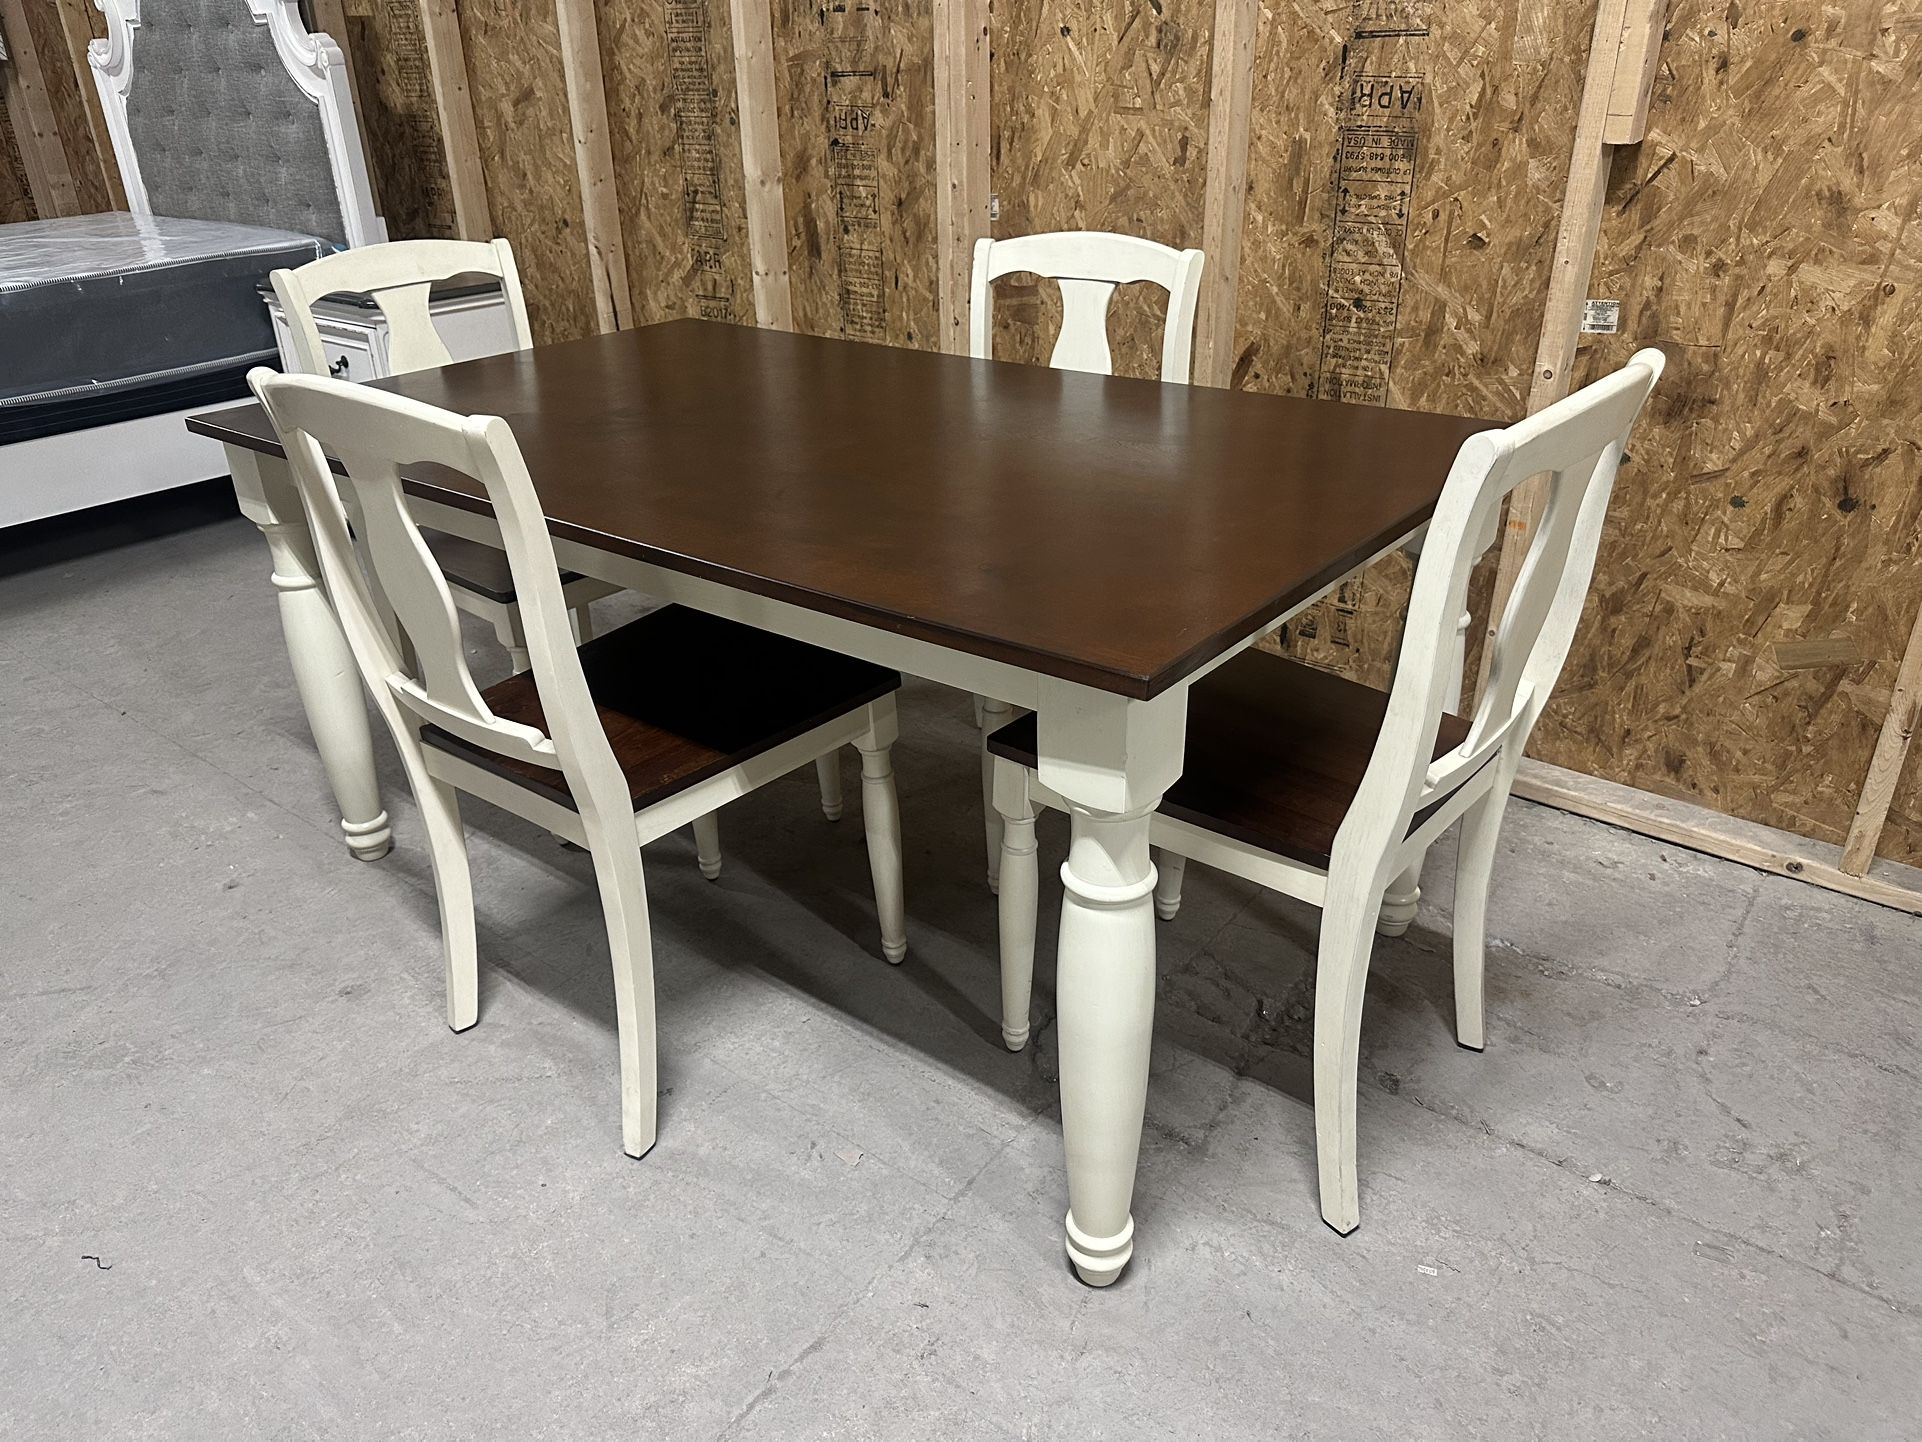 66” x 39” Solid Hardwood Dining Table W/4 Chairs - Delivery Available! 